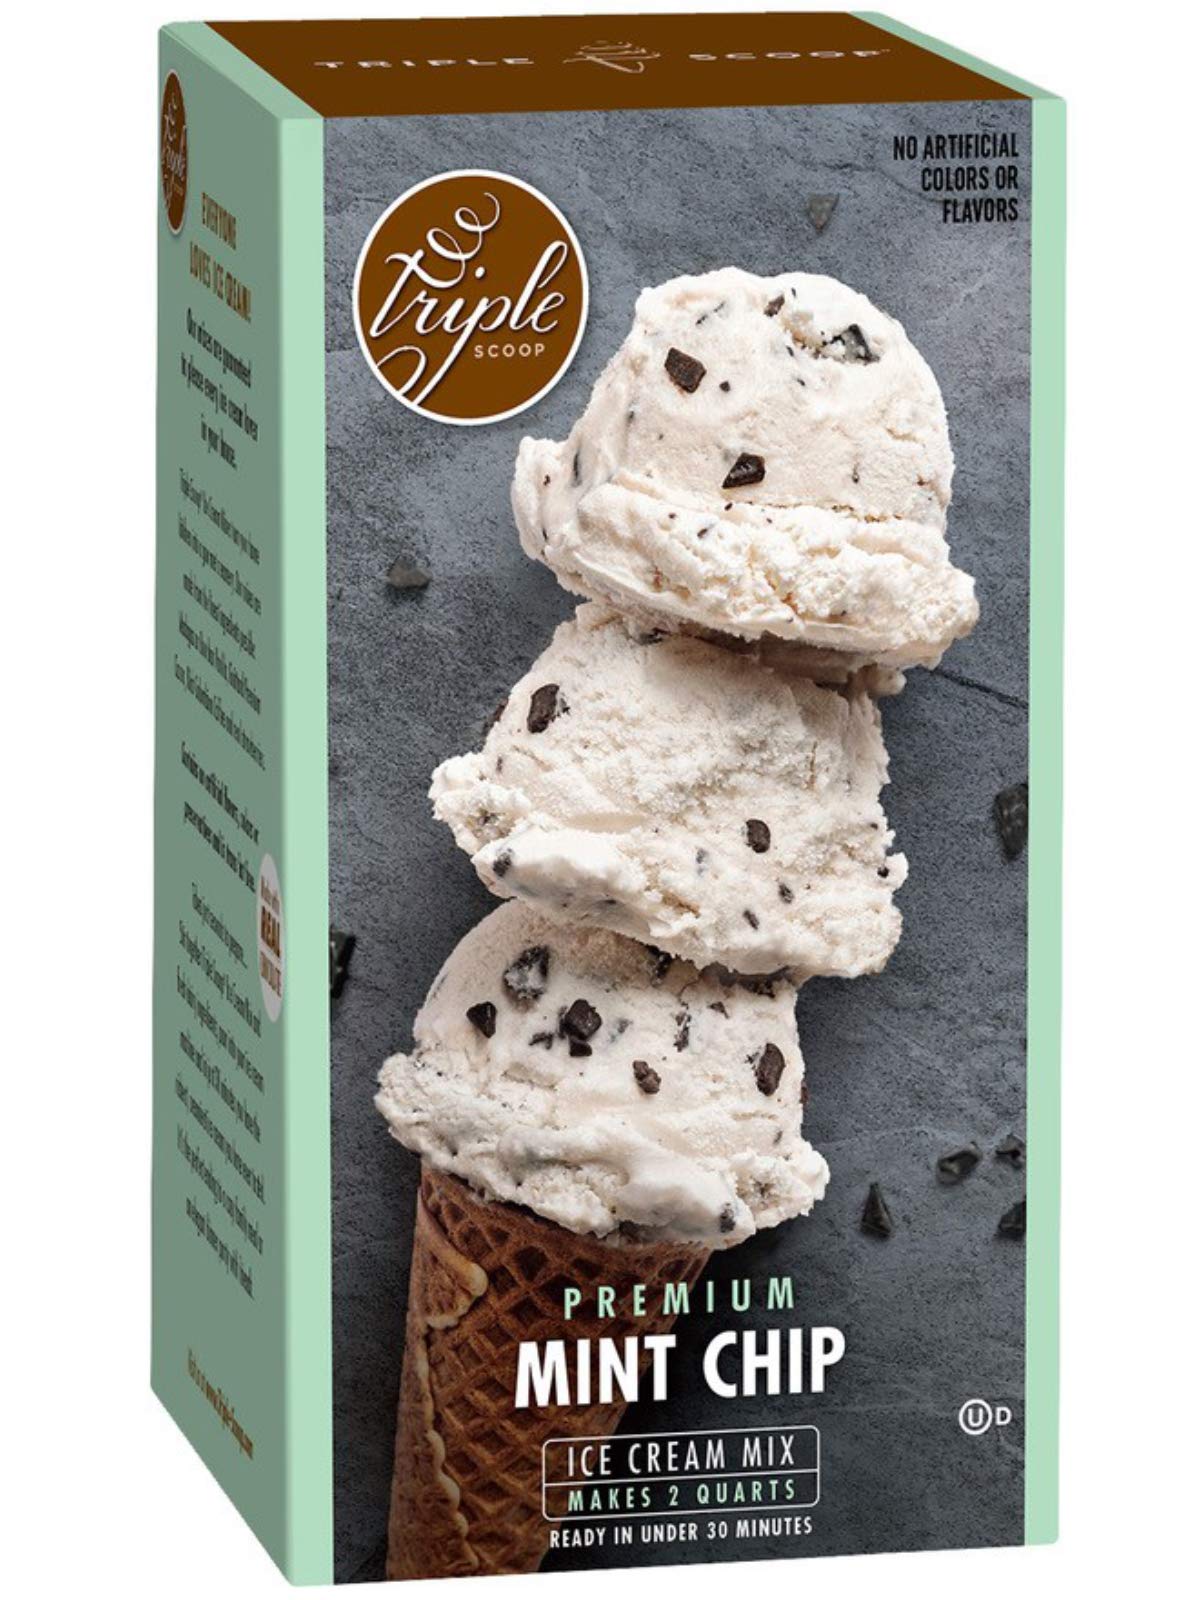 Book Cover Premium Mint Chocolate Chip Ice Cream Starter Mix for ice cream maker. Simple, easy, delicious. From gourmet mix to maker in 5 minutes. Makes 2 creamy quarts. Made in USA. (1/14.8 oz box) Mint Chocolate Chip 1 - Box